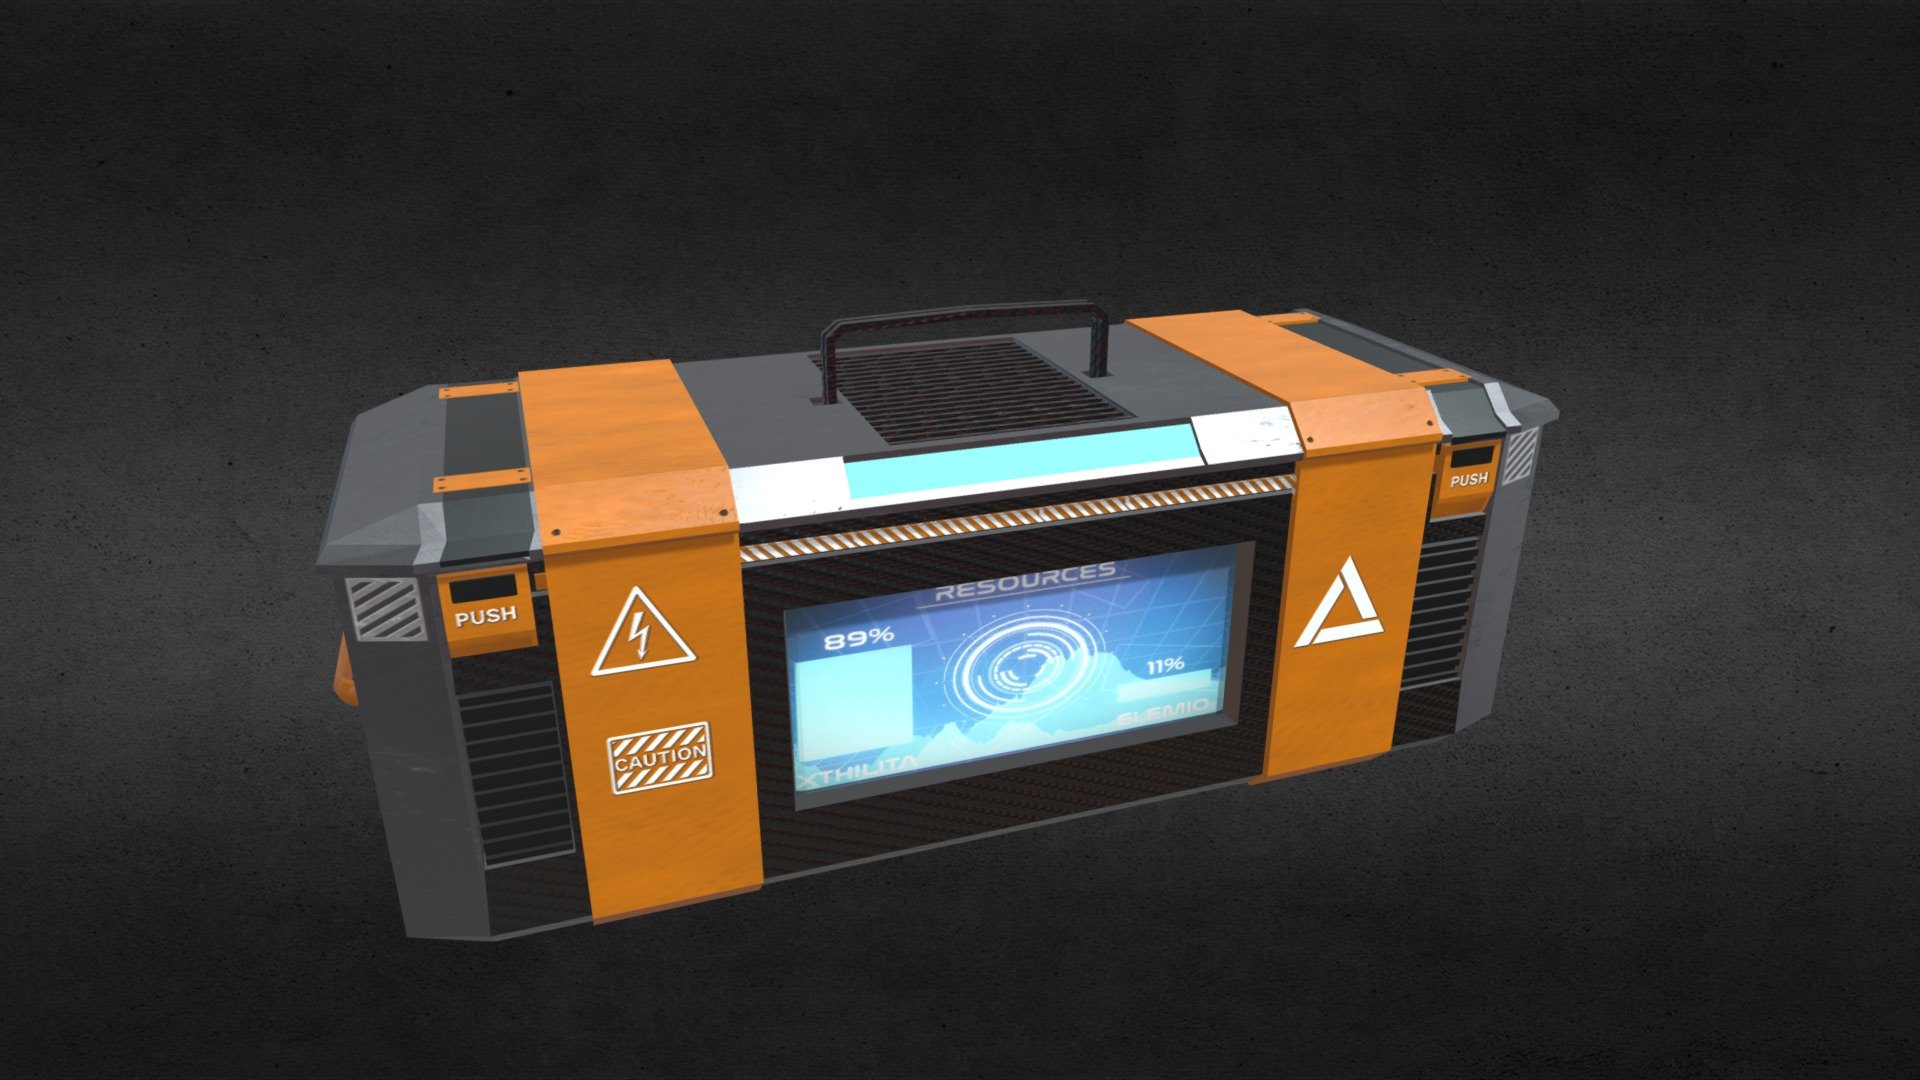 sci-fi crate designed by blender textured by substance painter , this model is low poly mode ready for games and engines uvwp is in the best situation 2000 vertices 4000 polygons - box_001 - 3D model by arianheidarpour 3d model